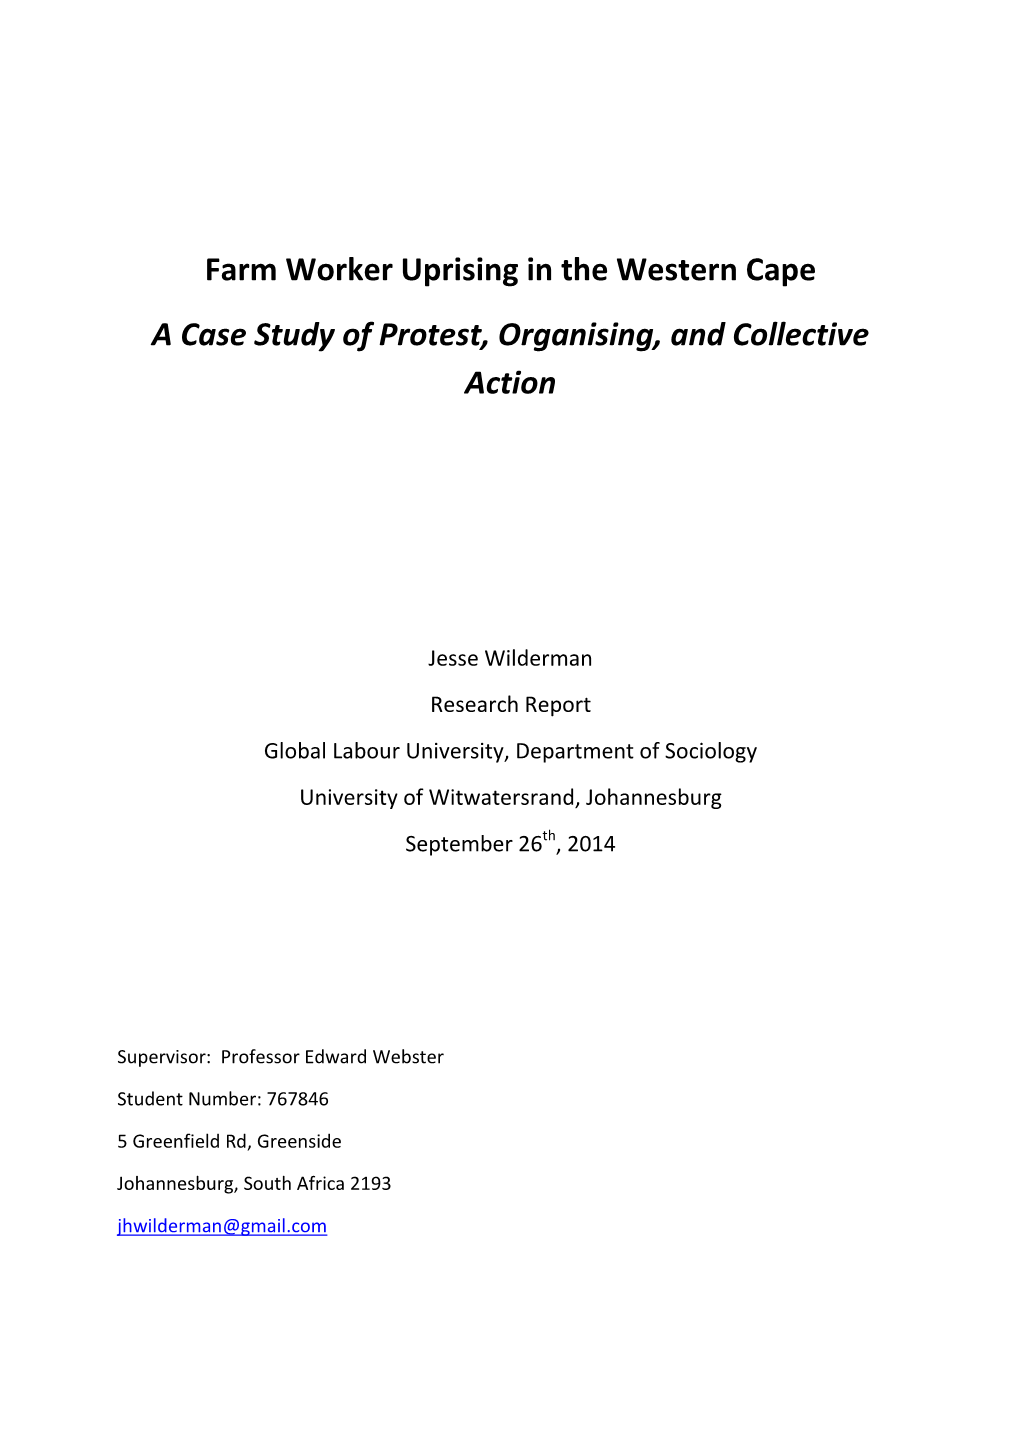 Farm Worker Uprising in the Western Cape a Case Study of Protest, Organising, and Collective Action